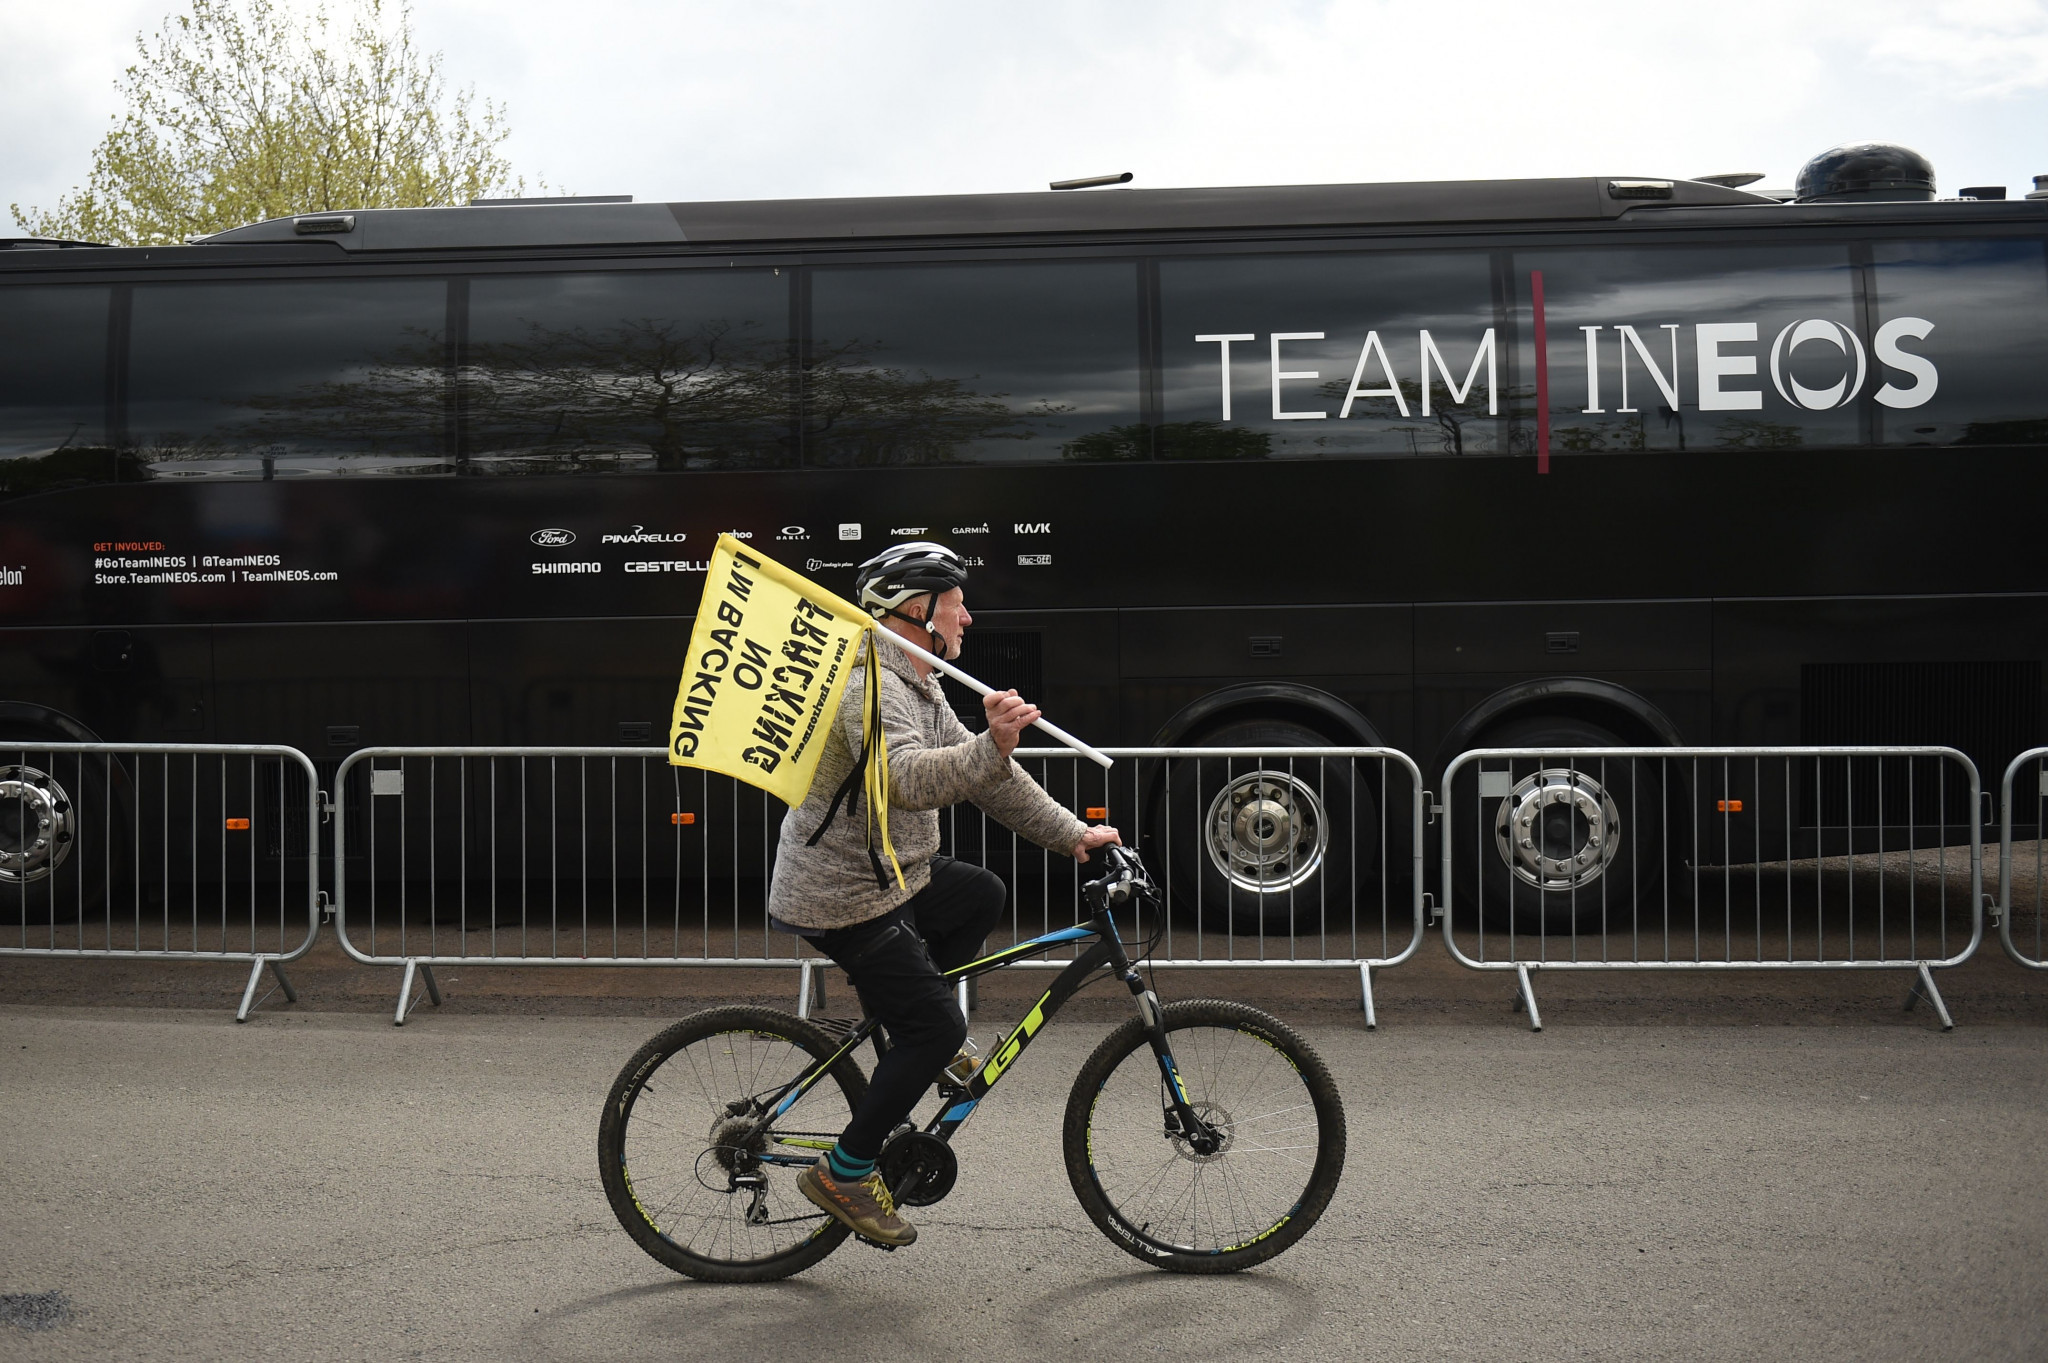 Protesters held demonstrations outside the Team Ineos bus at the Tour de Yorkshire today ©Getty Images